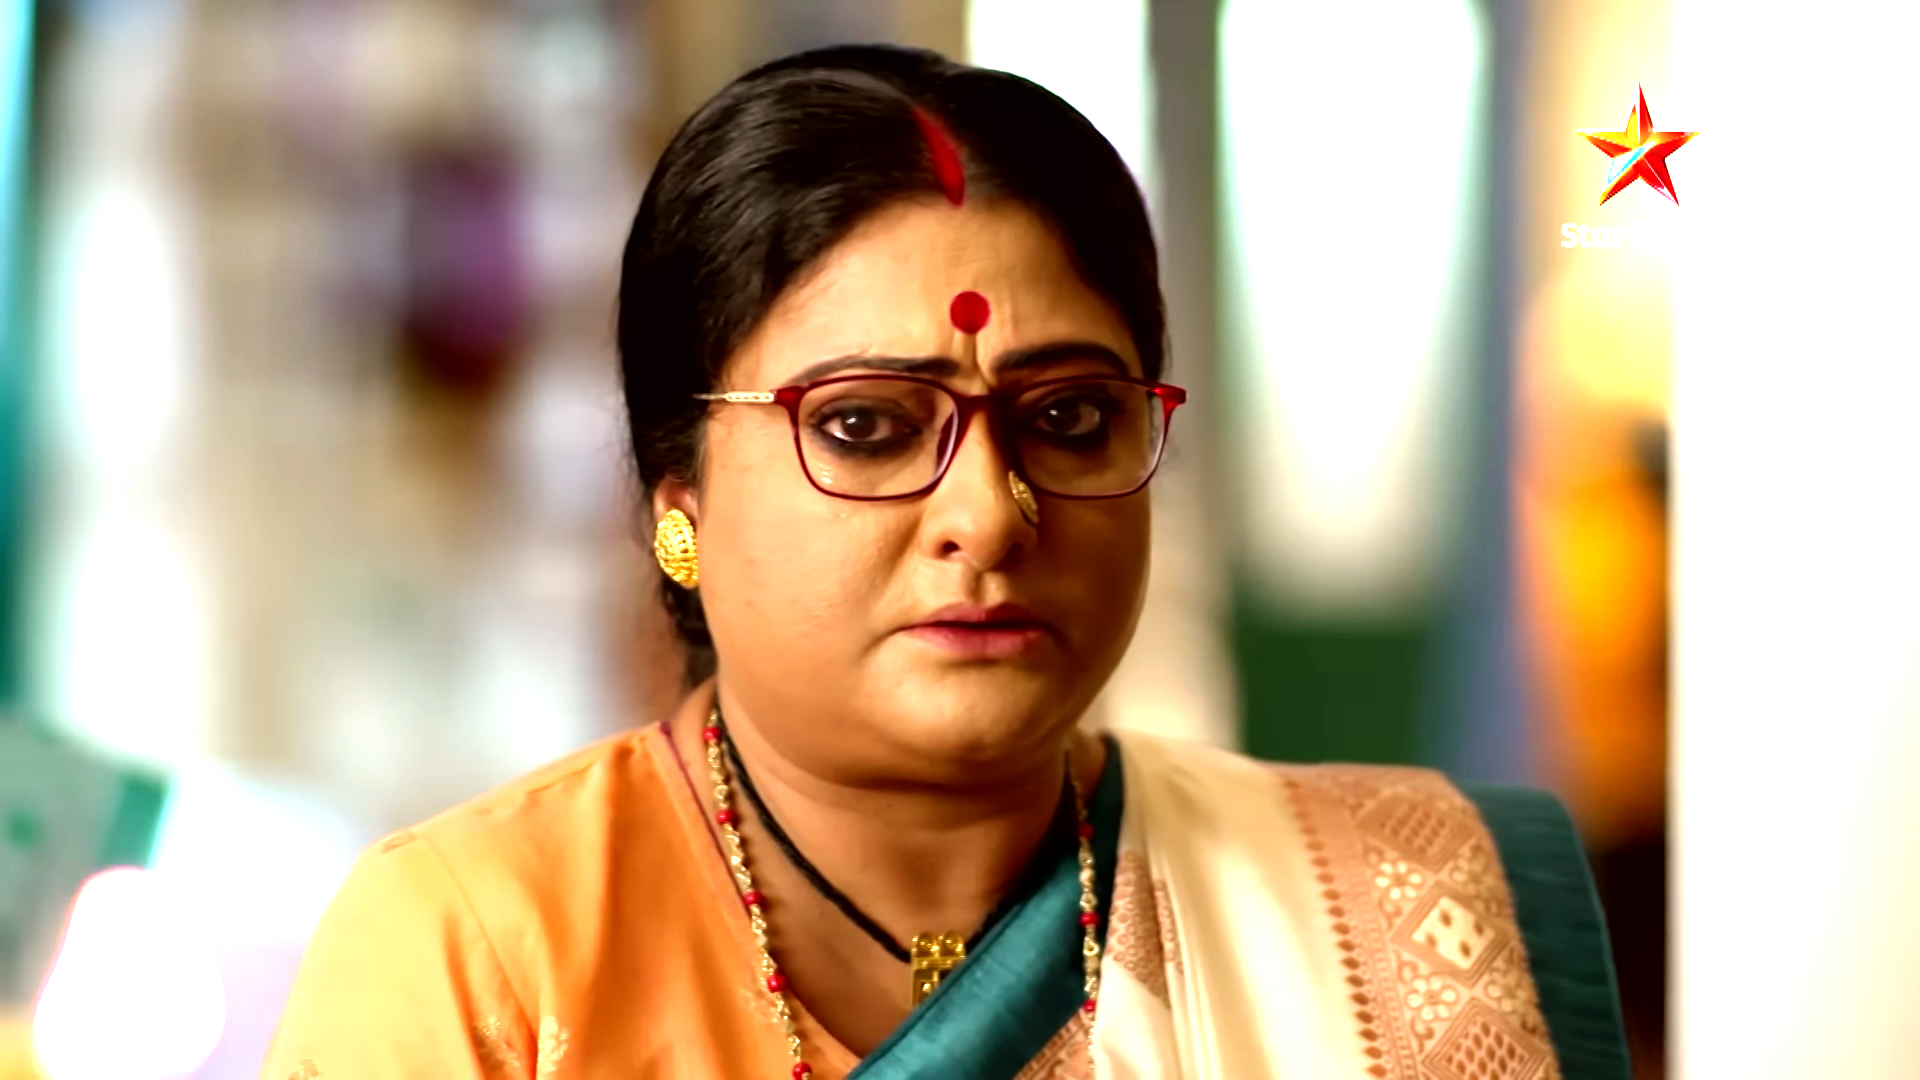 Positive mother in law's of bengali serial